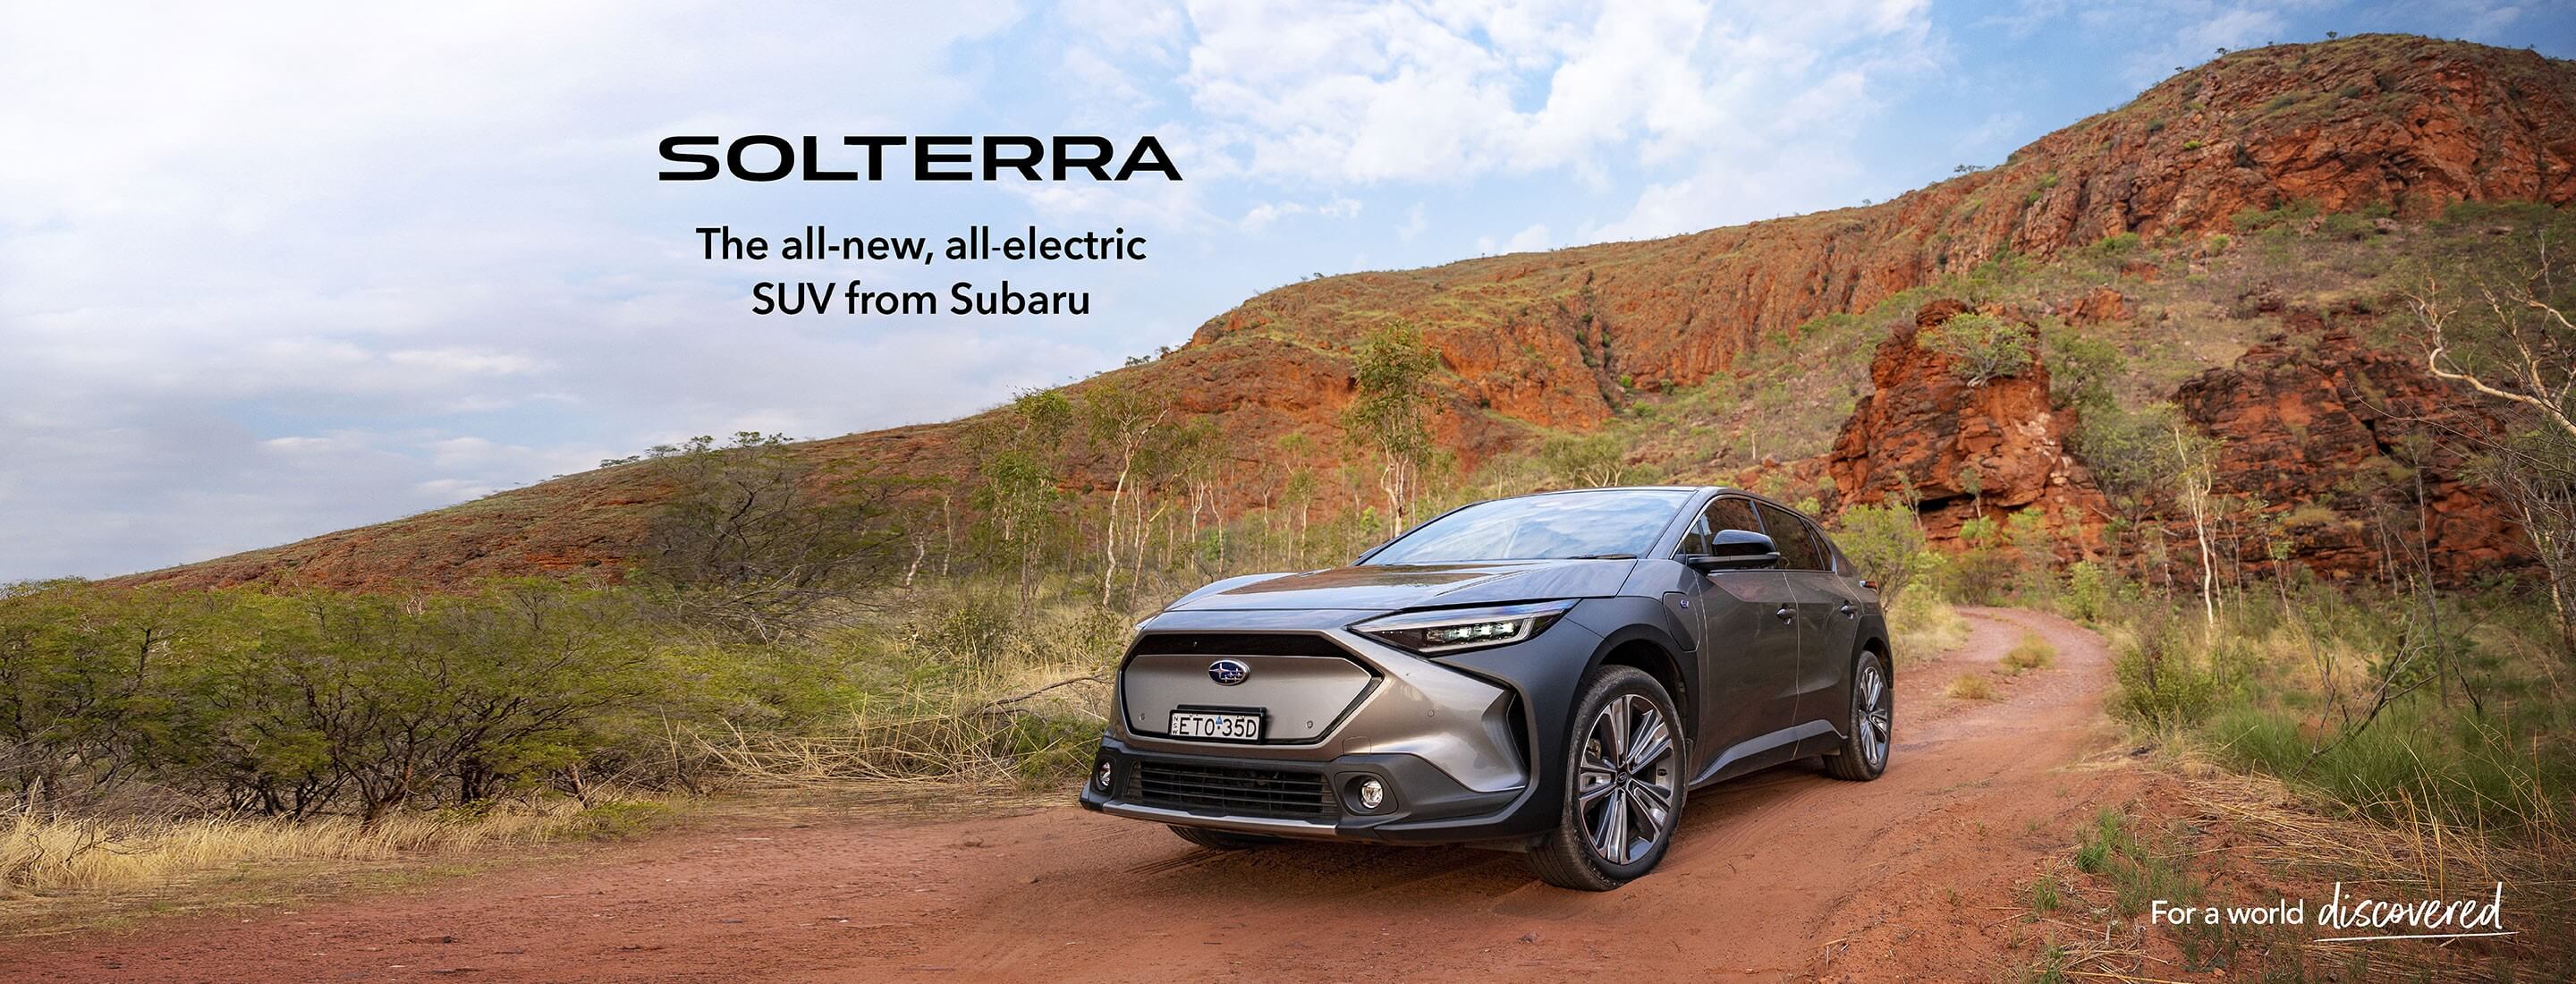  All-new, all-electric SUV Subaru Solterra<br>A new dawn for all seasons Image